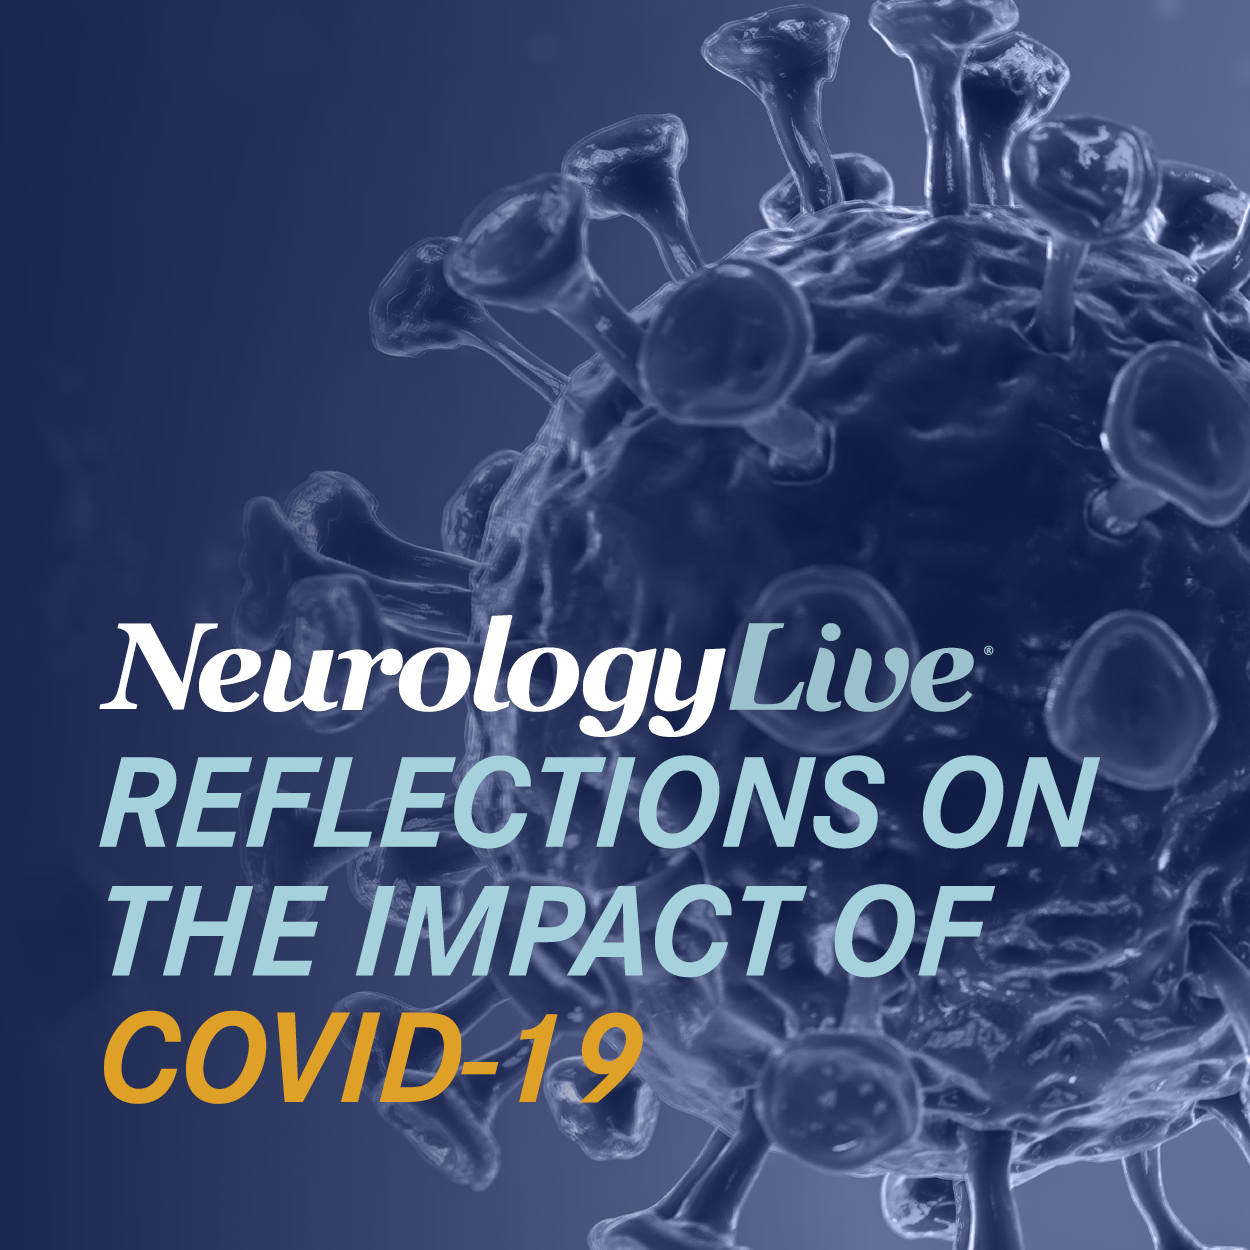 Reflections on COVID-19: What We Know About the Neurologic Symptoms